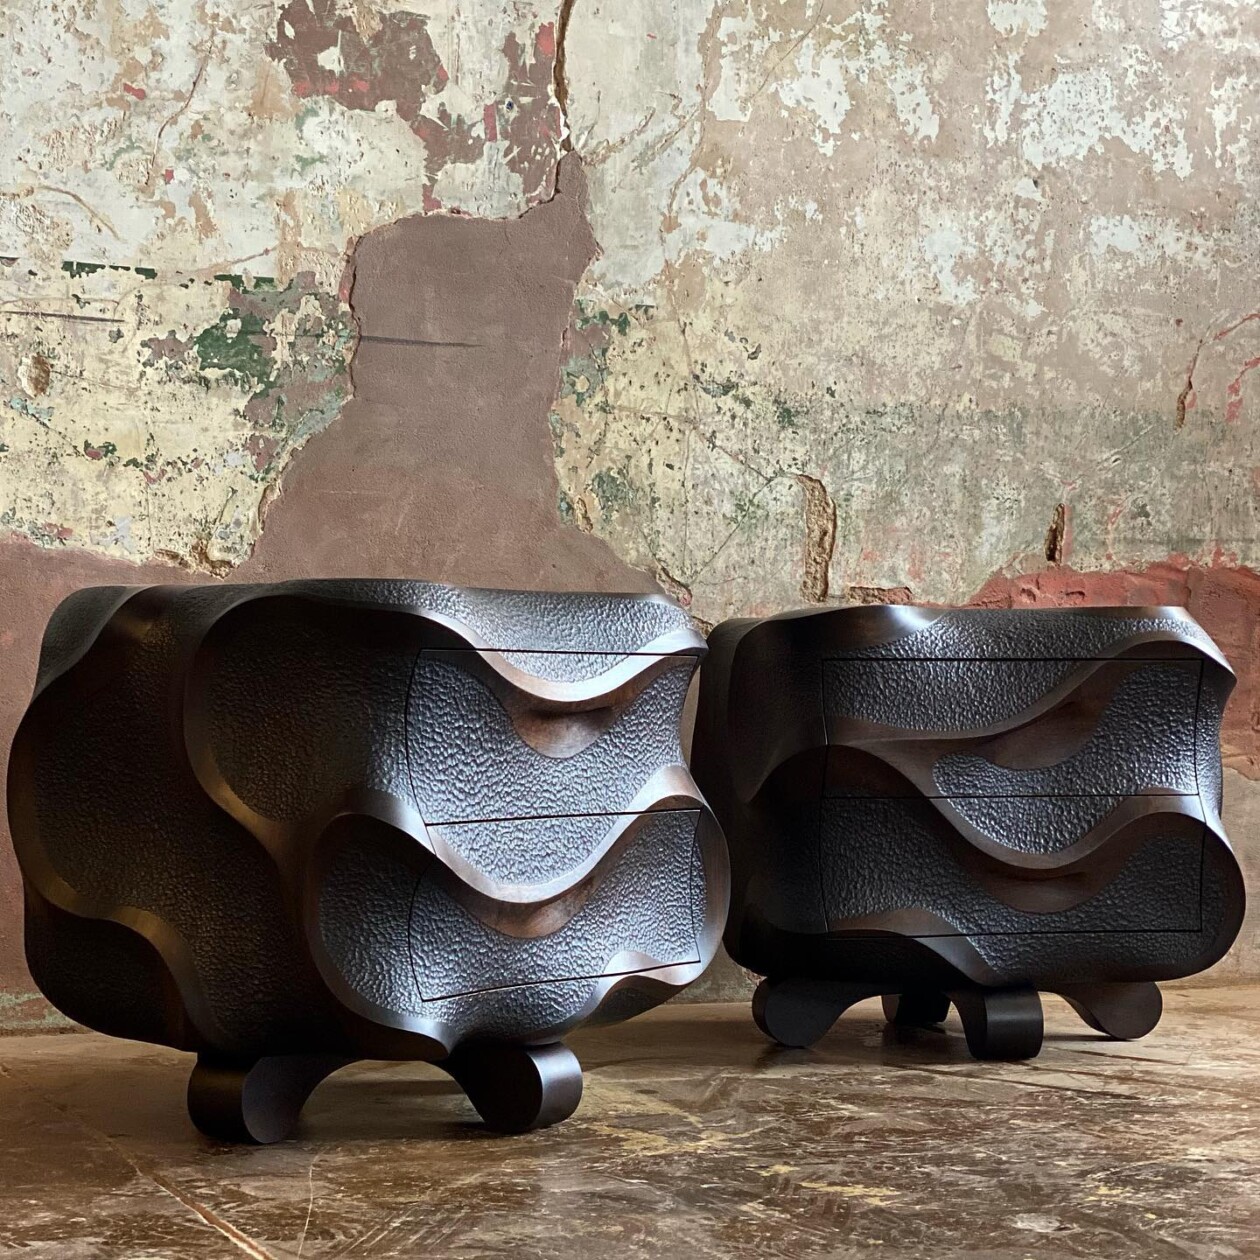 Intricately Engraved And Textured Organic Shaped Furniture By Caleb Woodard (4)